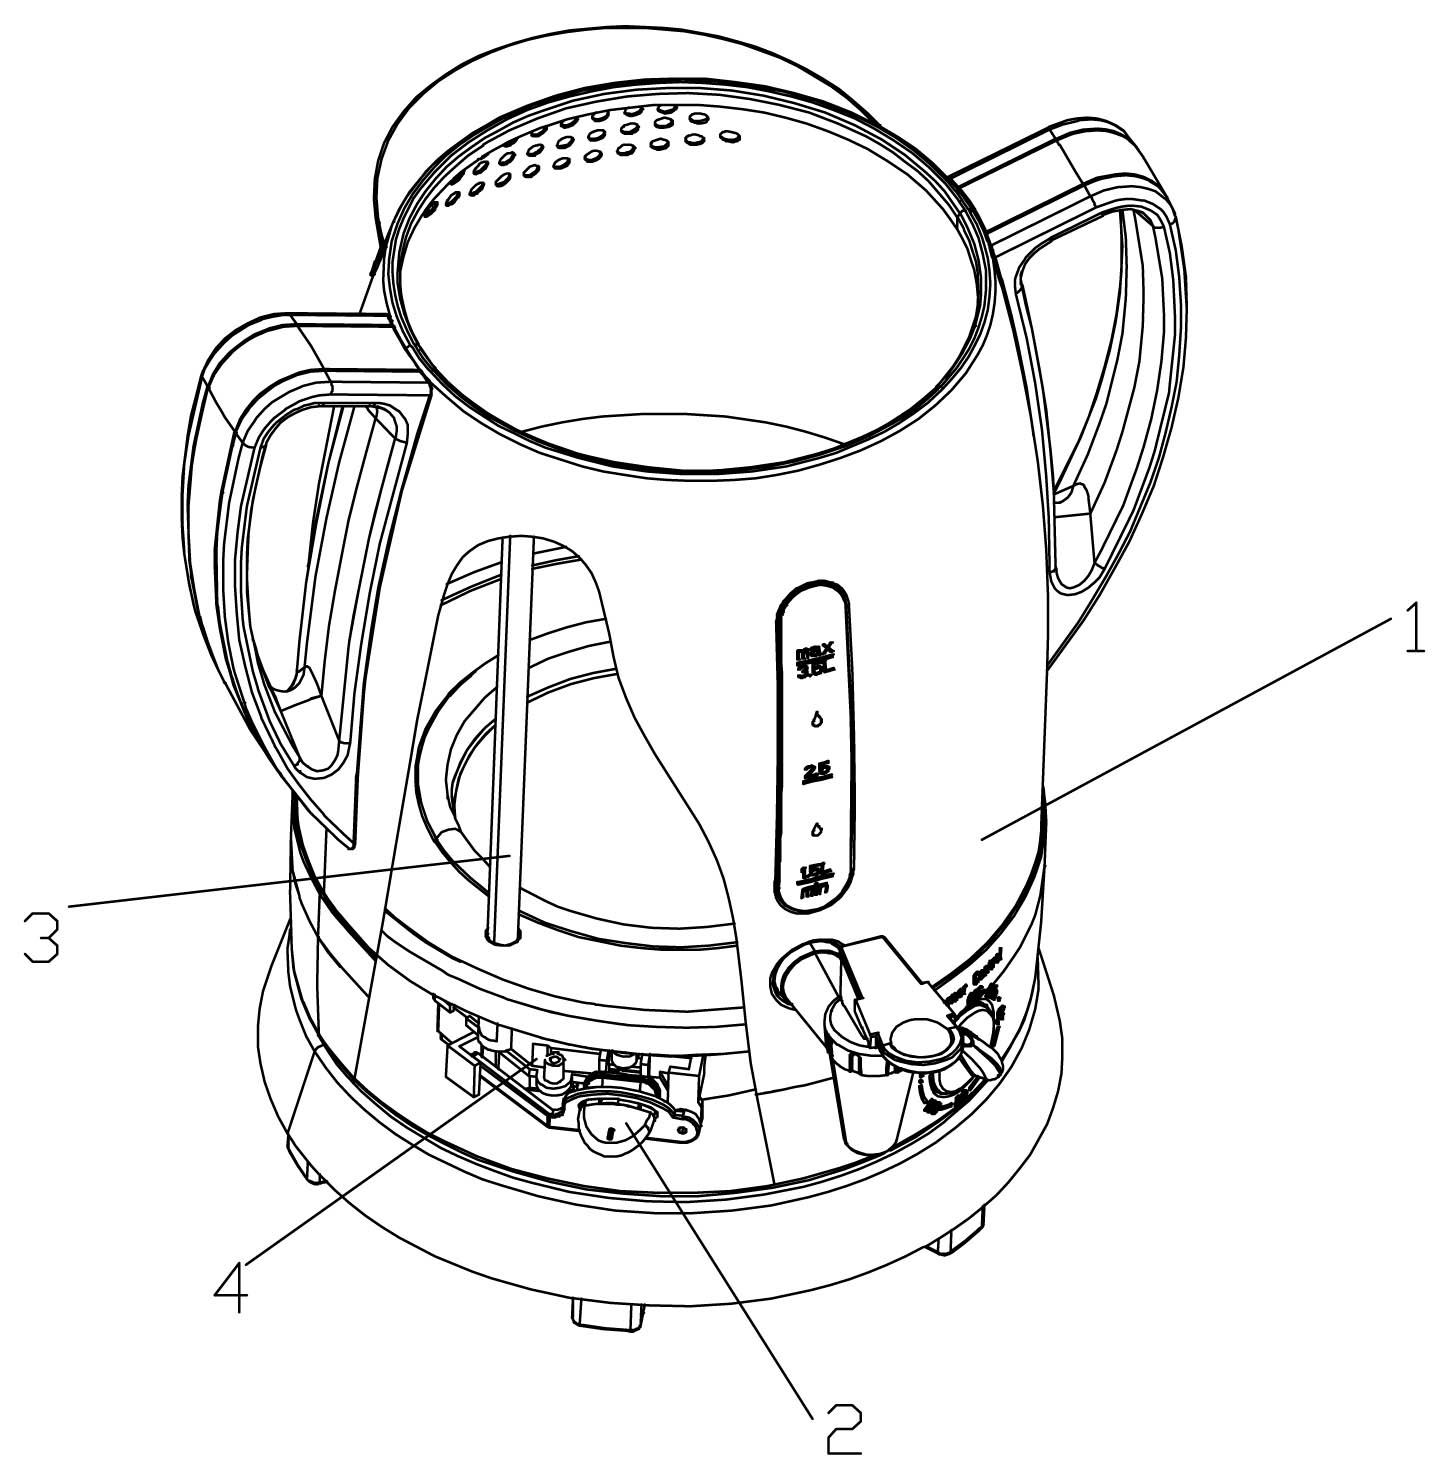 Electric kettle capable of automatically shutting off steam channel